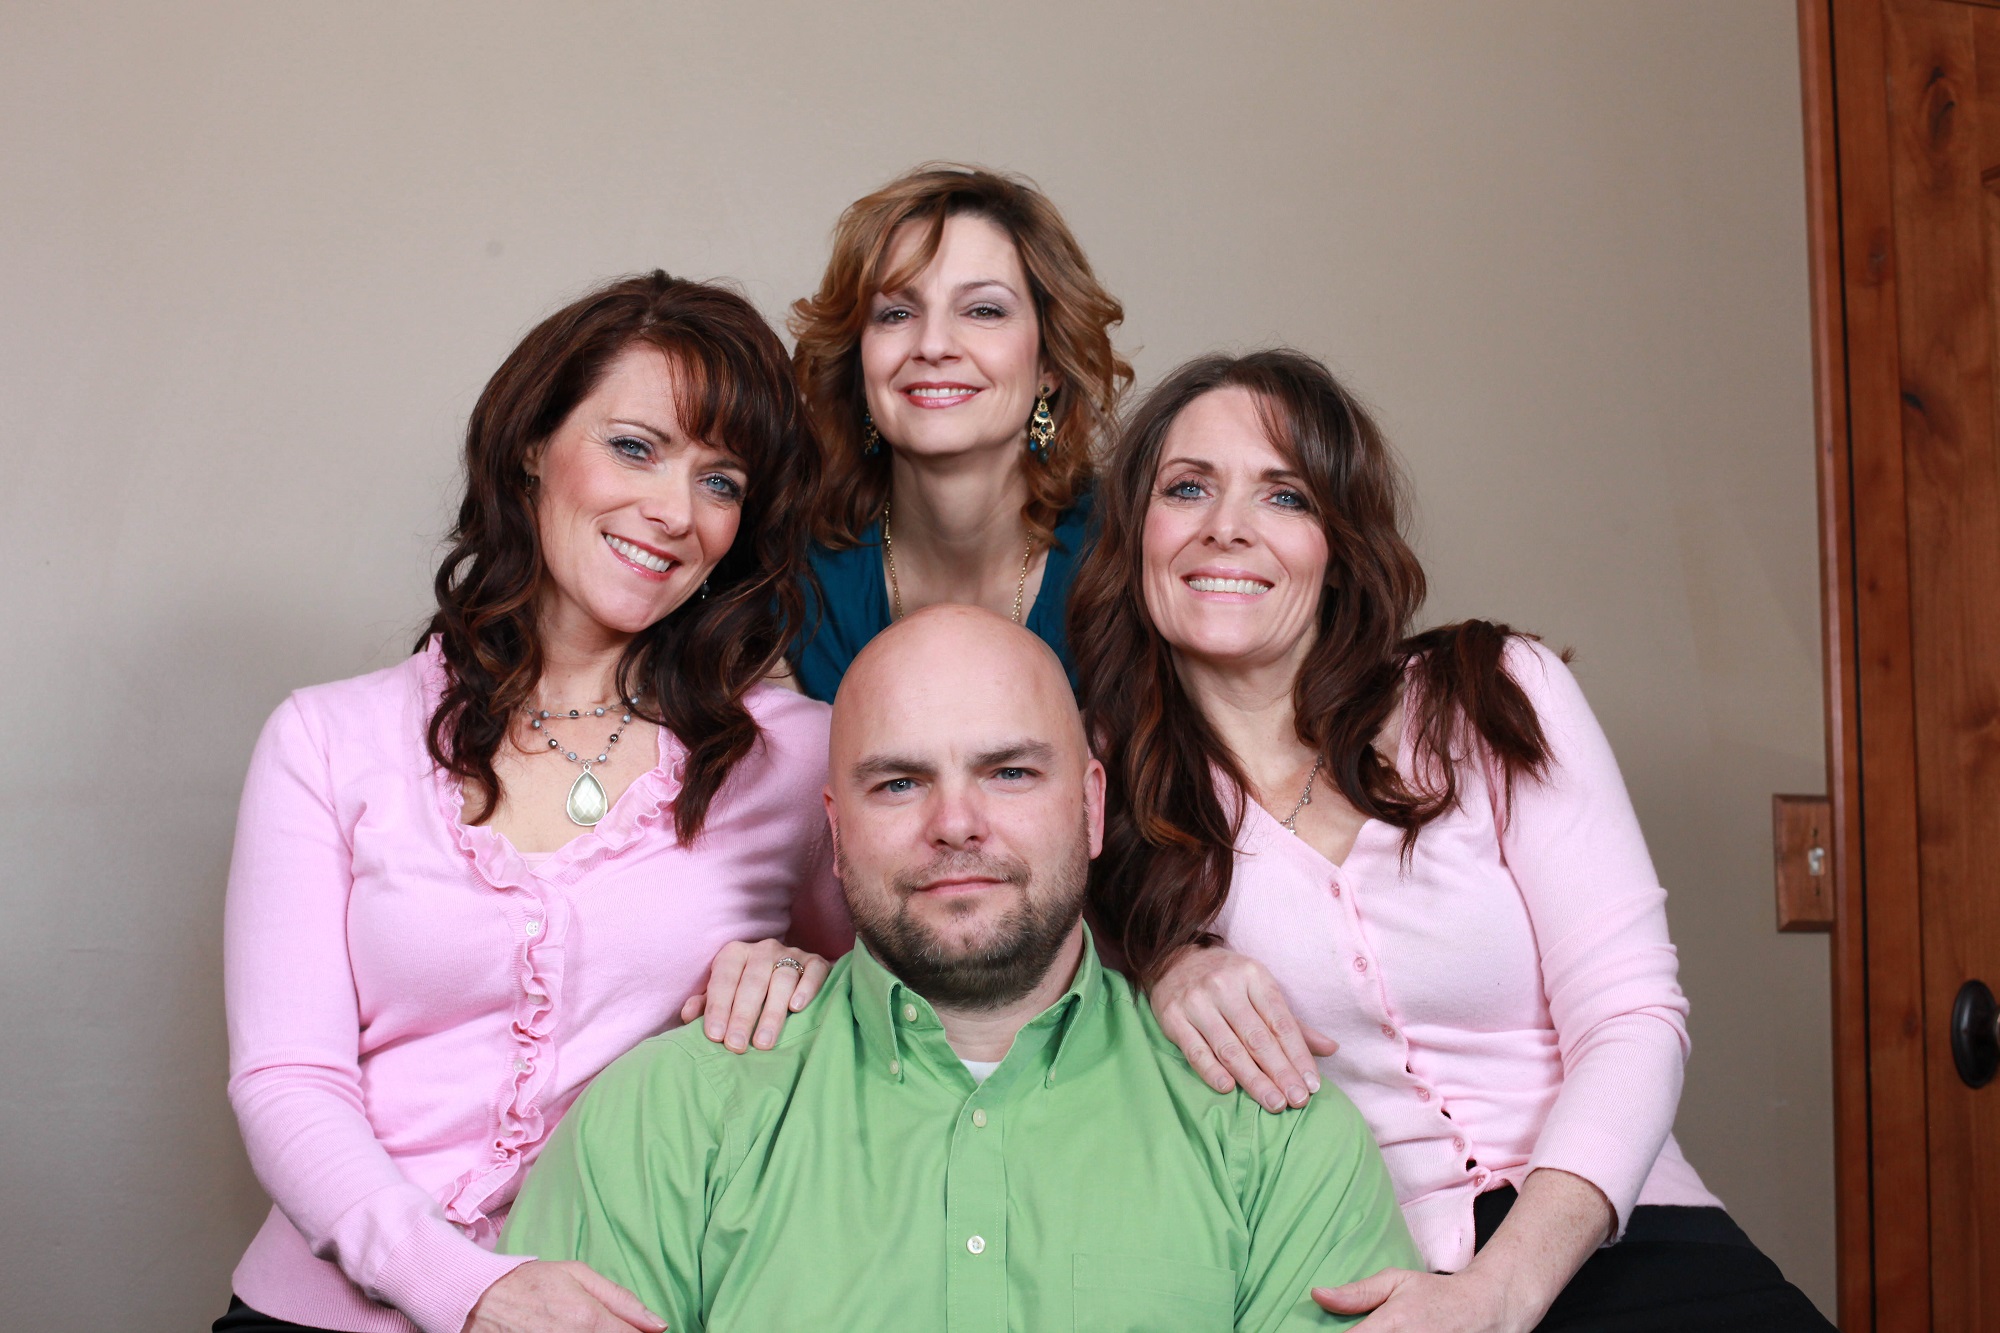 Joe Darger, 42, poses for a picture with his three wives Valerie, 41, Alina, 42 and Vicki, 41 on March 04, 2012